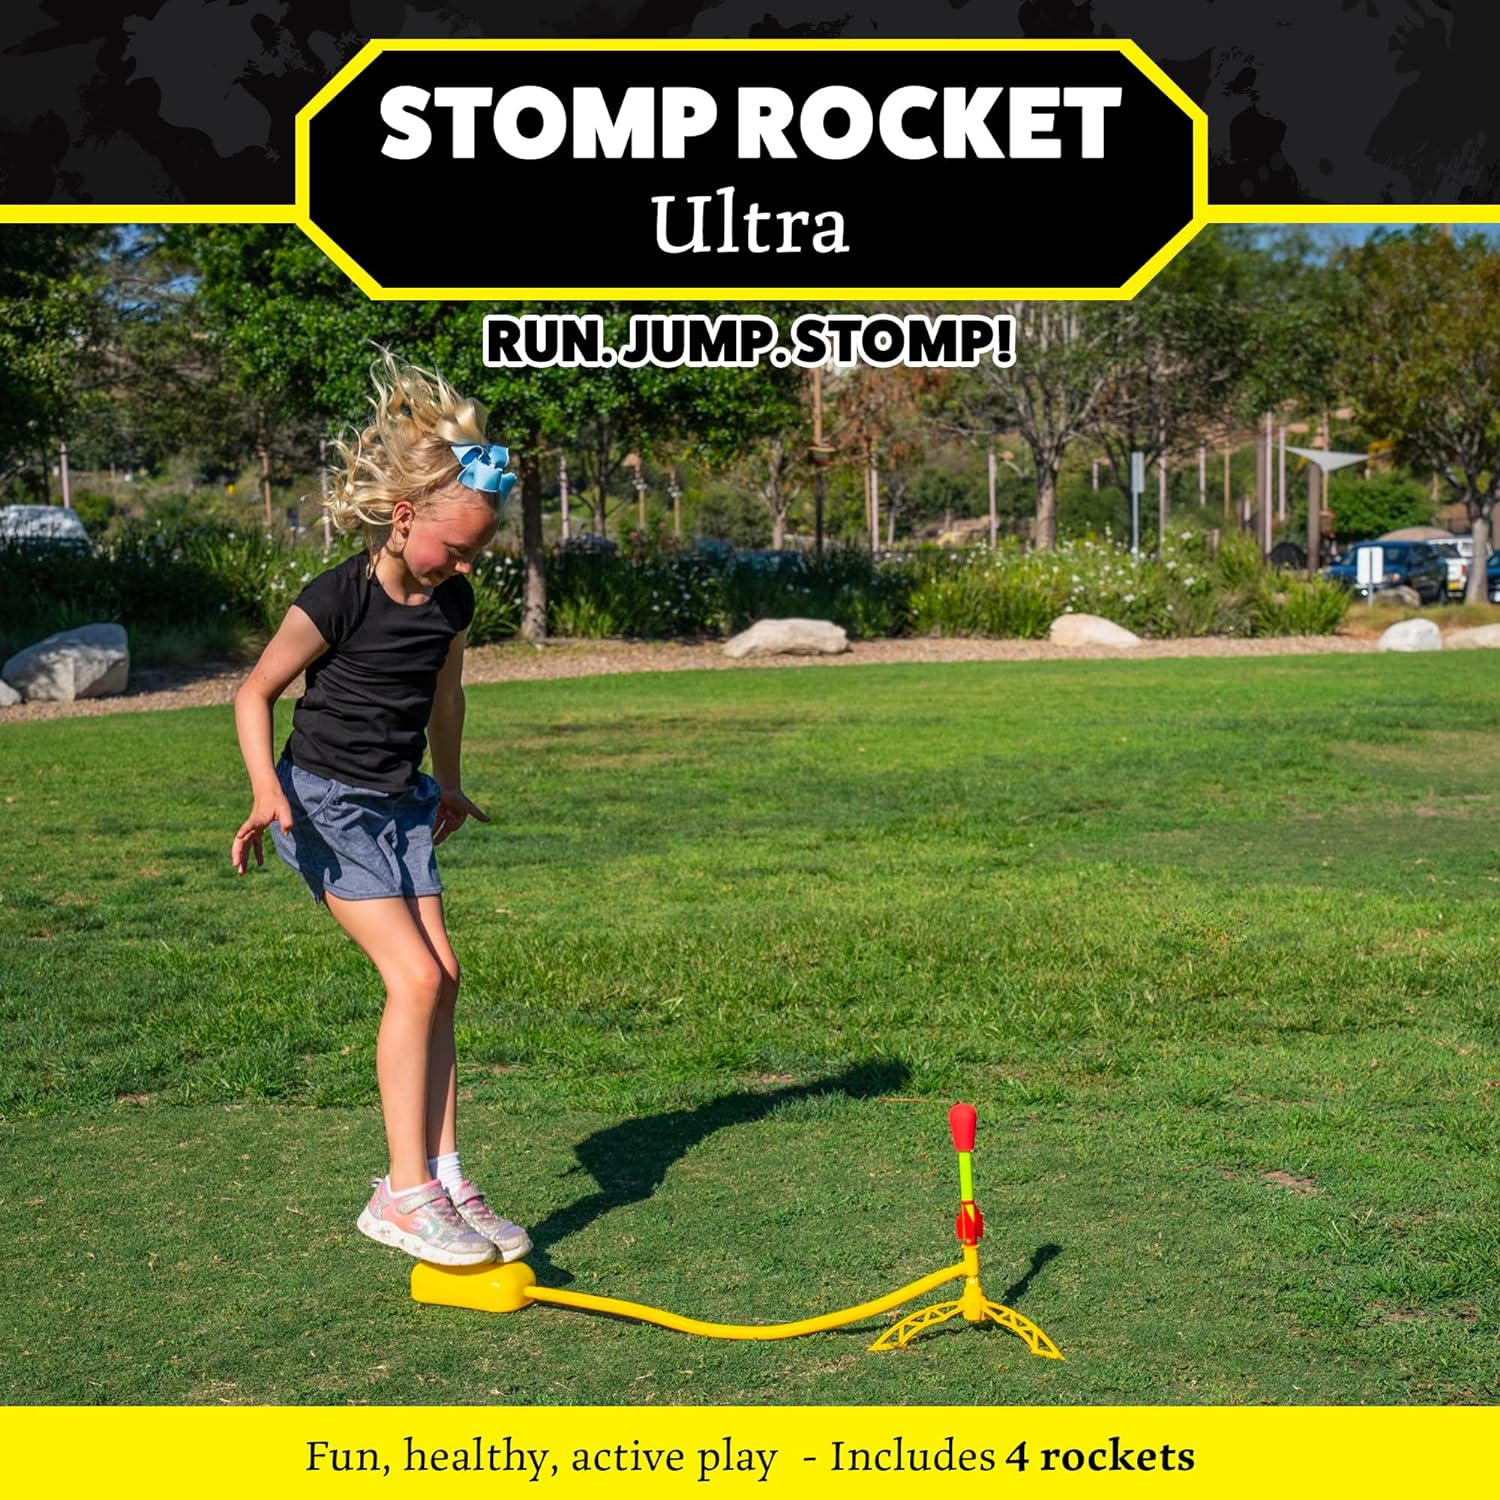 Stomp Rocket® Original Ultra Rocket Launcher for Kids, Soars 200 Ft, 4 Foam Rockets and Adjustable Launcher, Gift for Boys and Girls Ages 5 and up - image 3 of 8